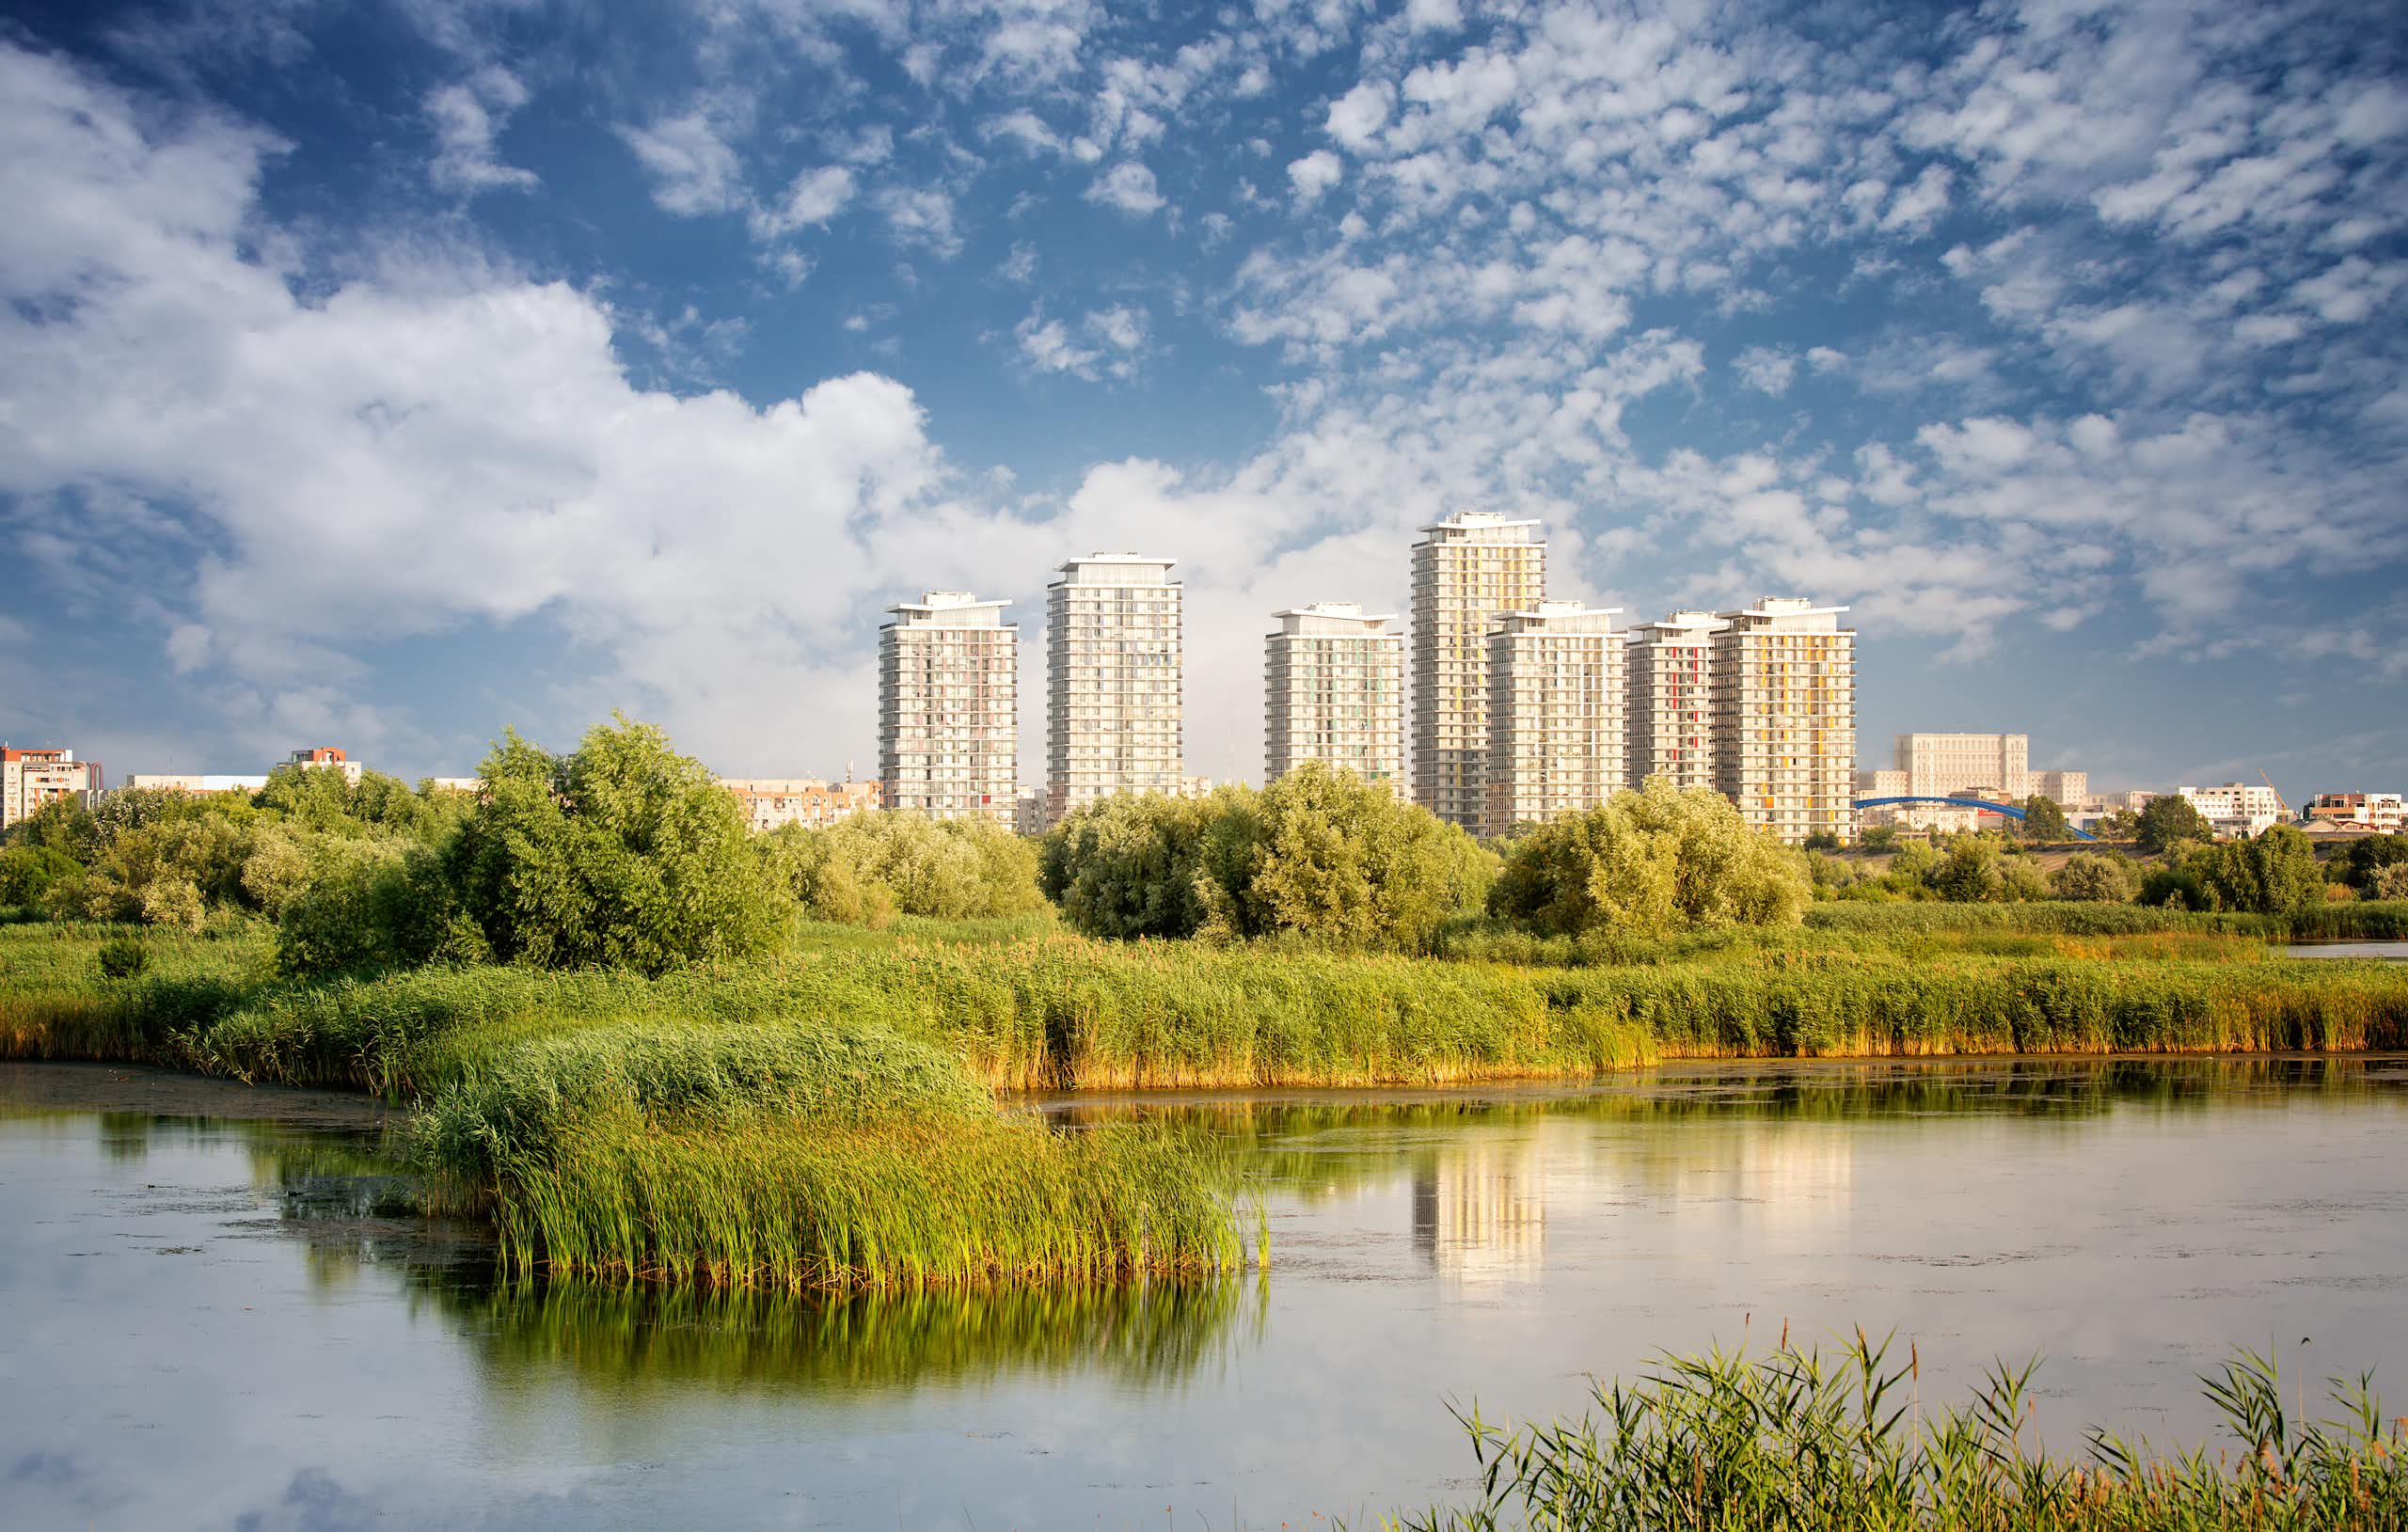 An urban skyline with a wetland in the foreground.